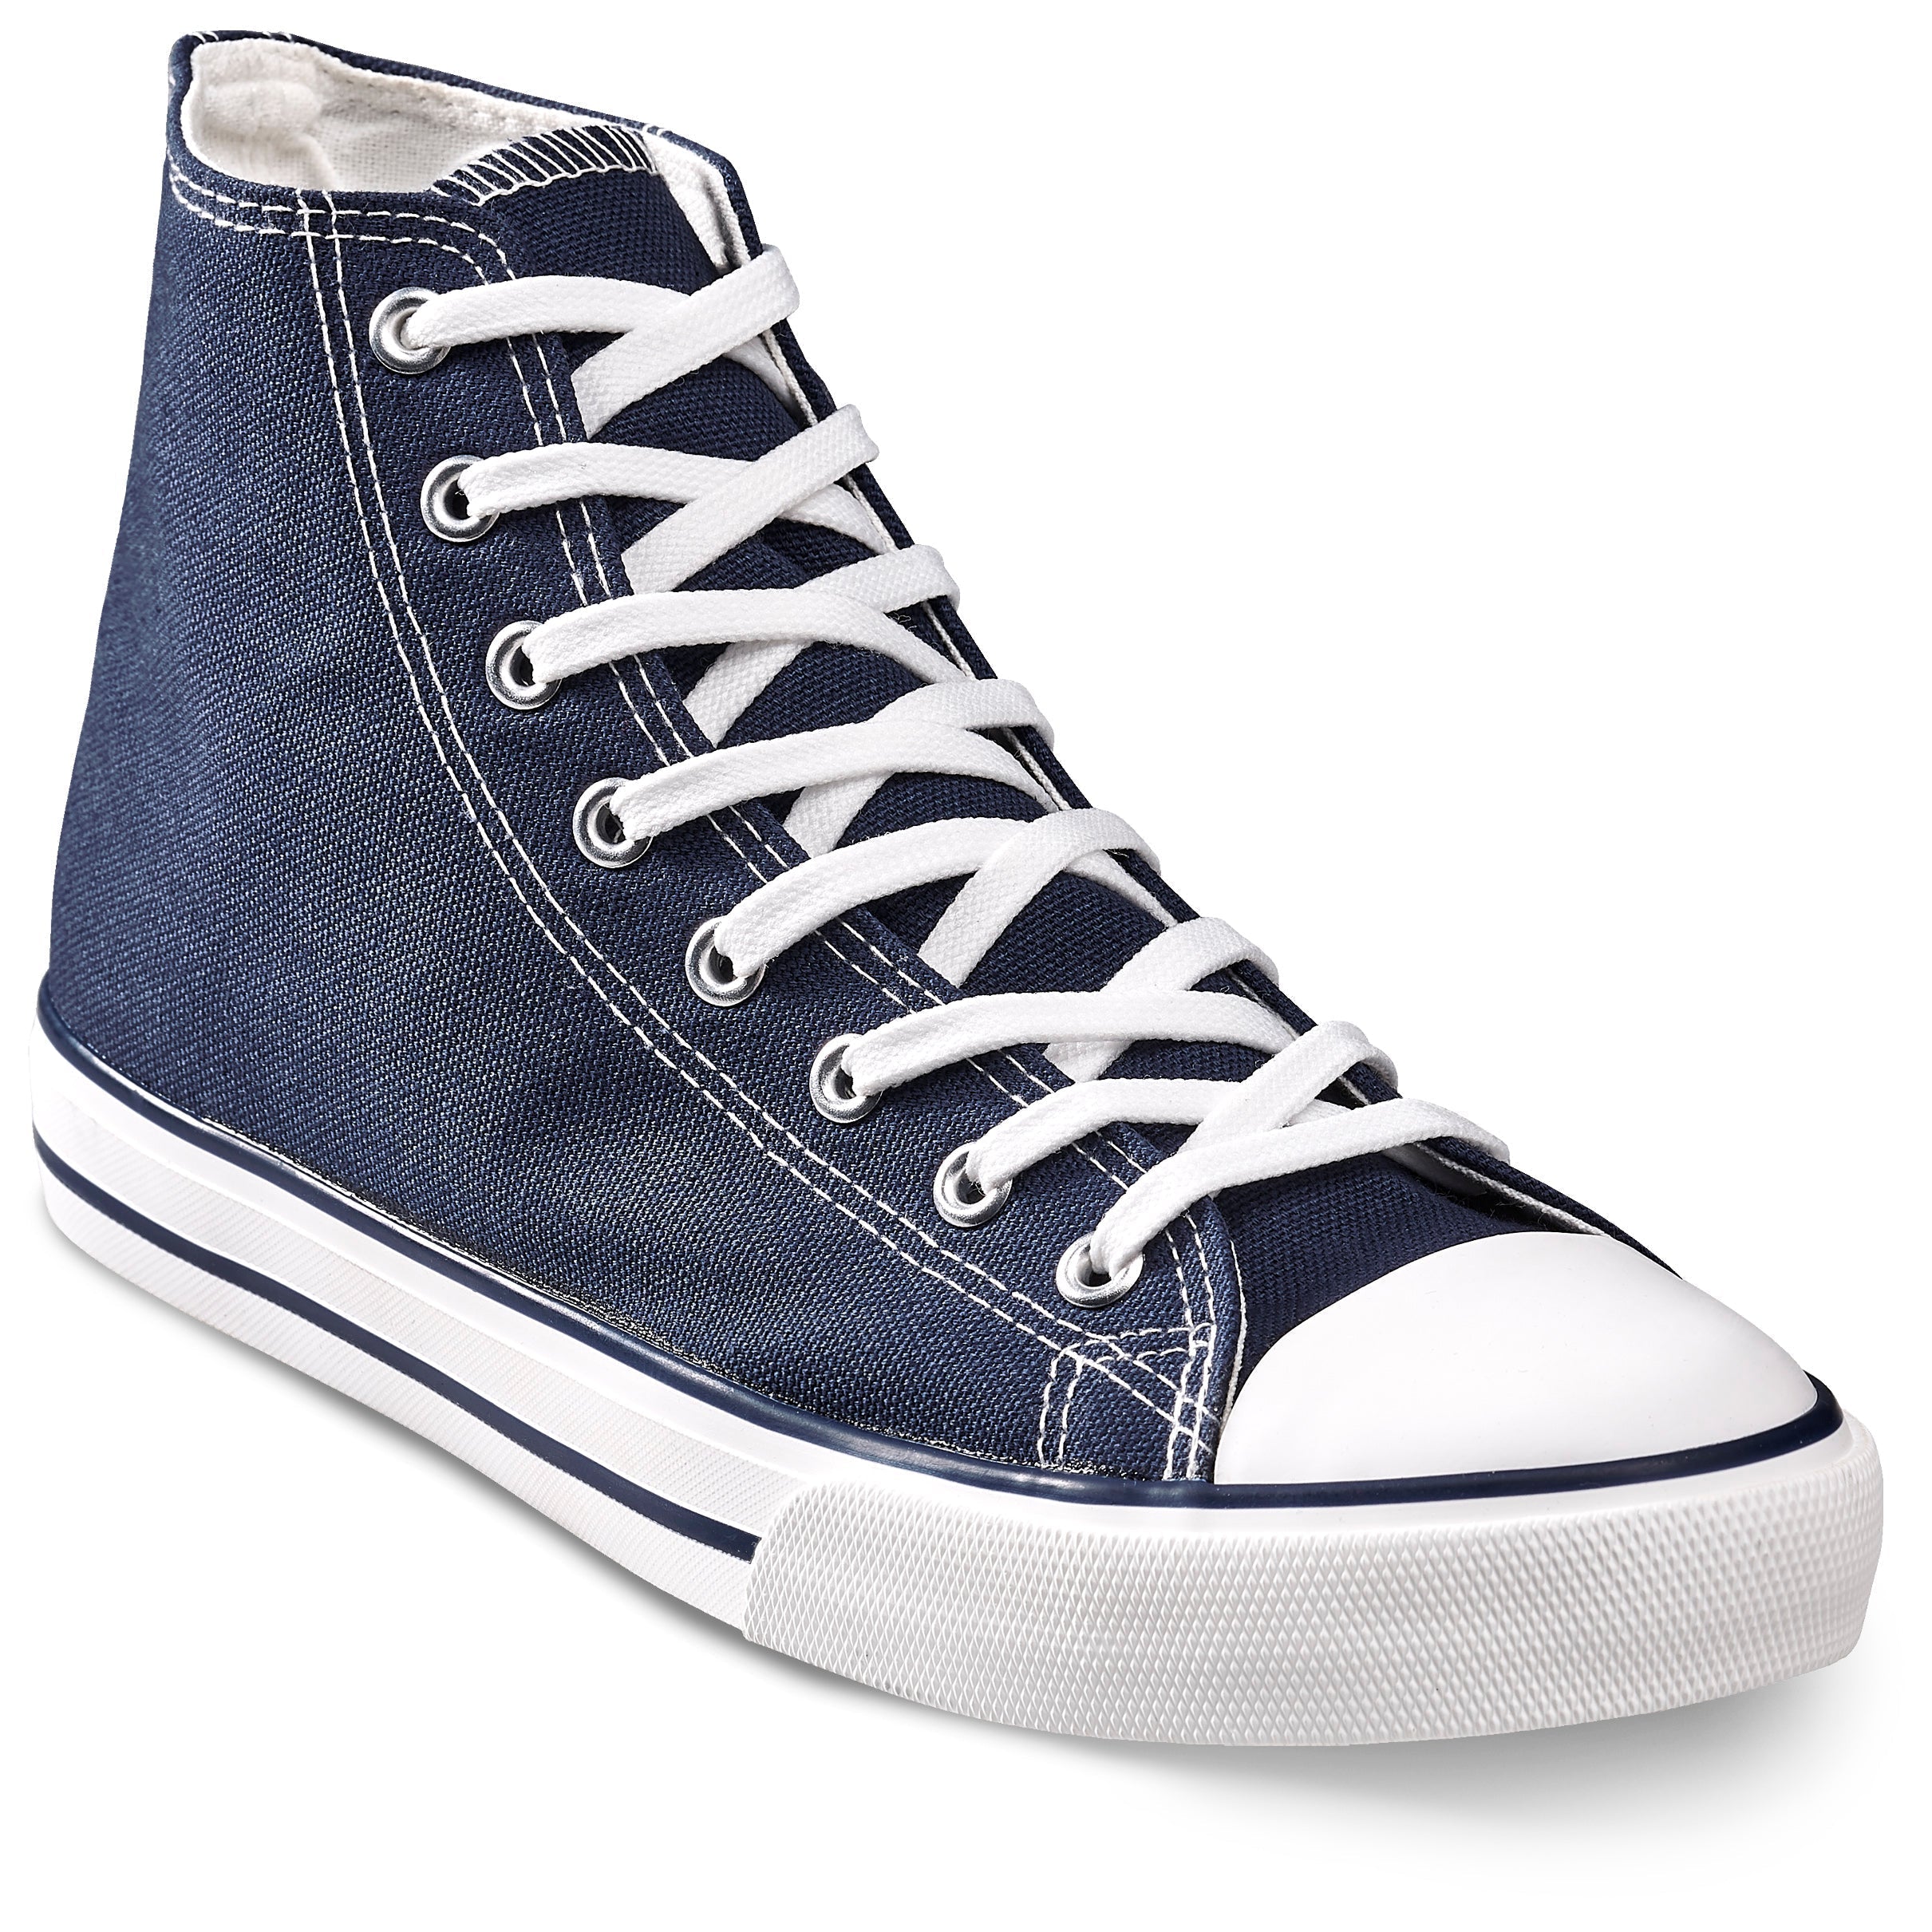 Unisex Retro High Top Canvas Sneaker-Shoes-2-Navy-N